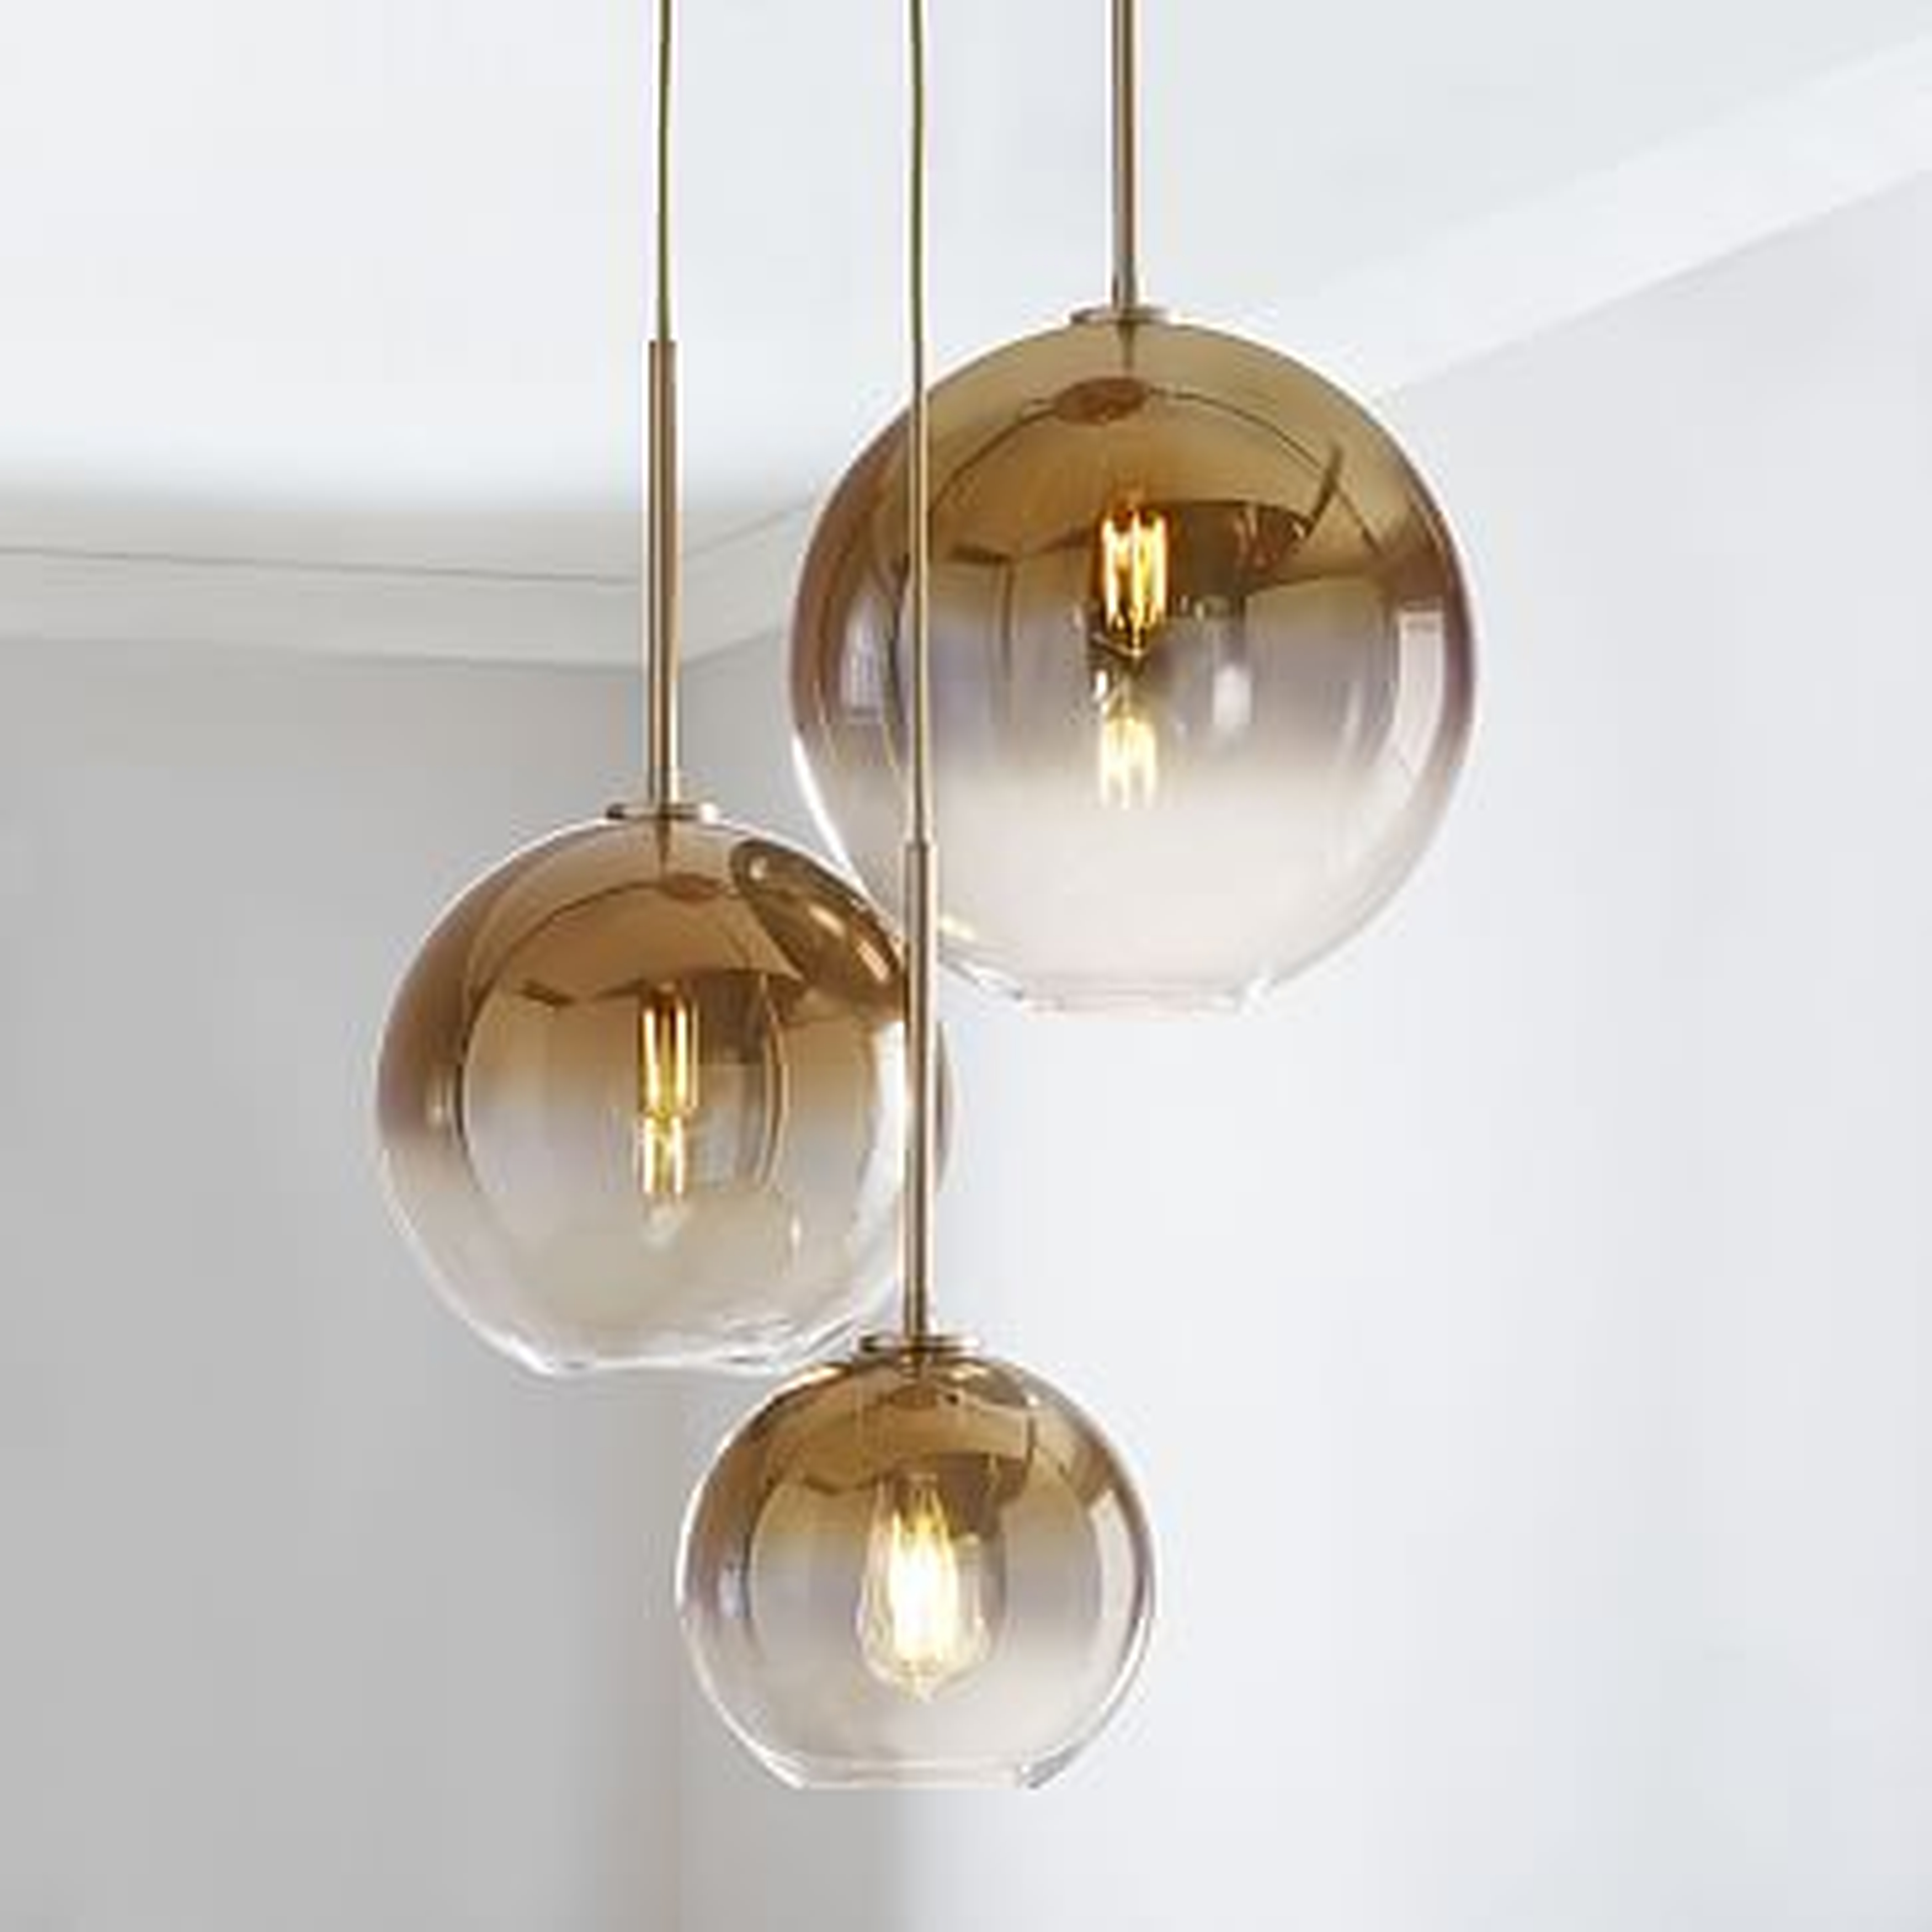 Sculptural Glass 3-Light Round Globe Chandelier, S-M-L Globe, Gold Ombre Shade, Brass Canopy (mixed sizes) - West Elm